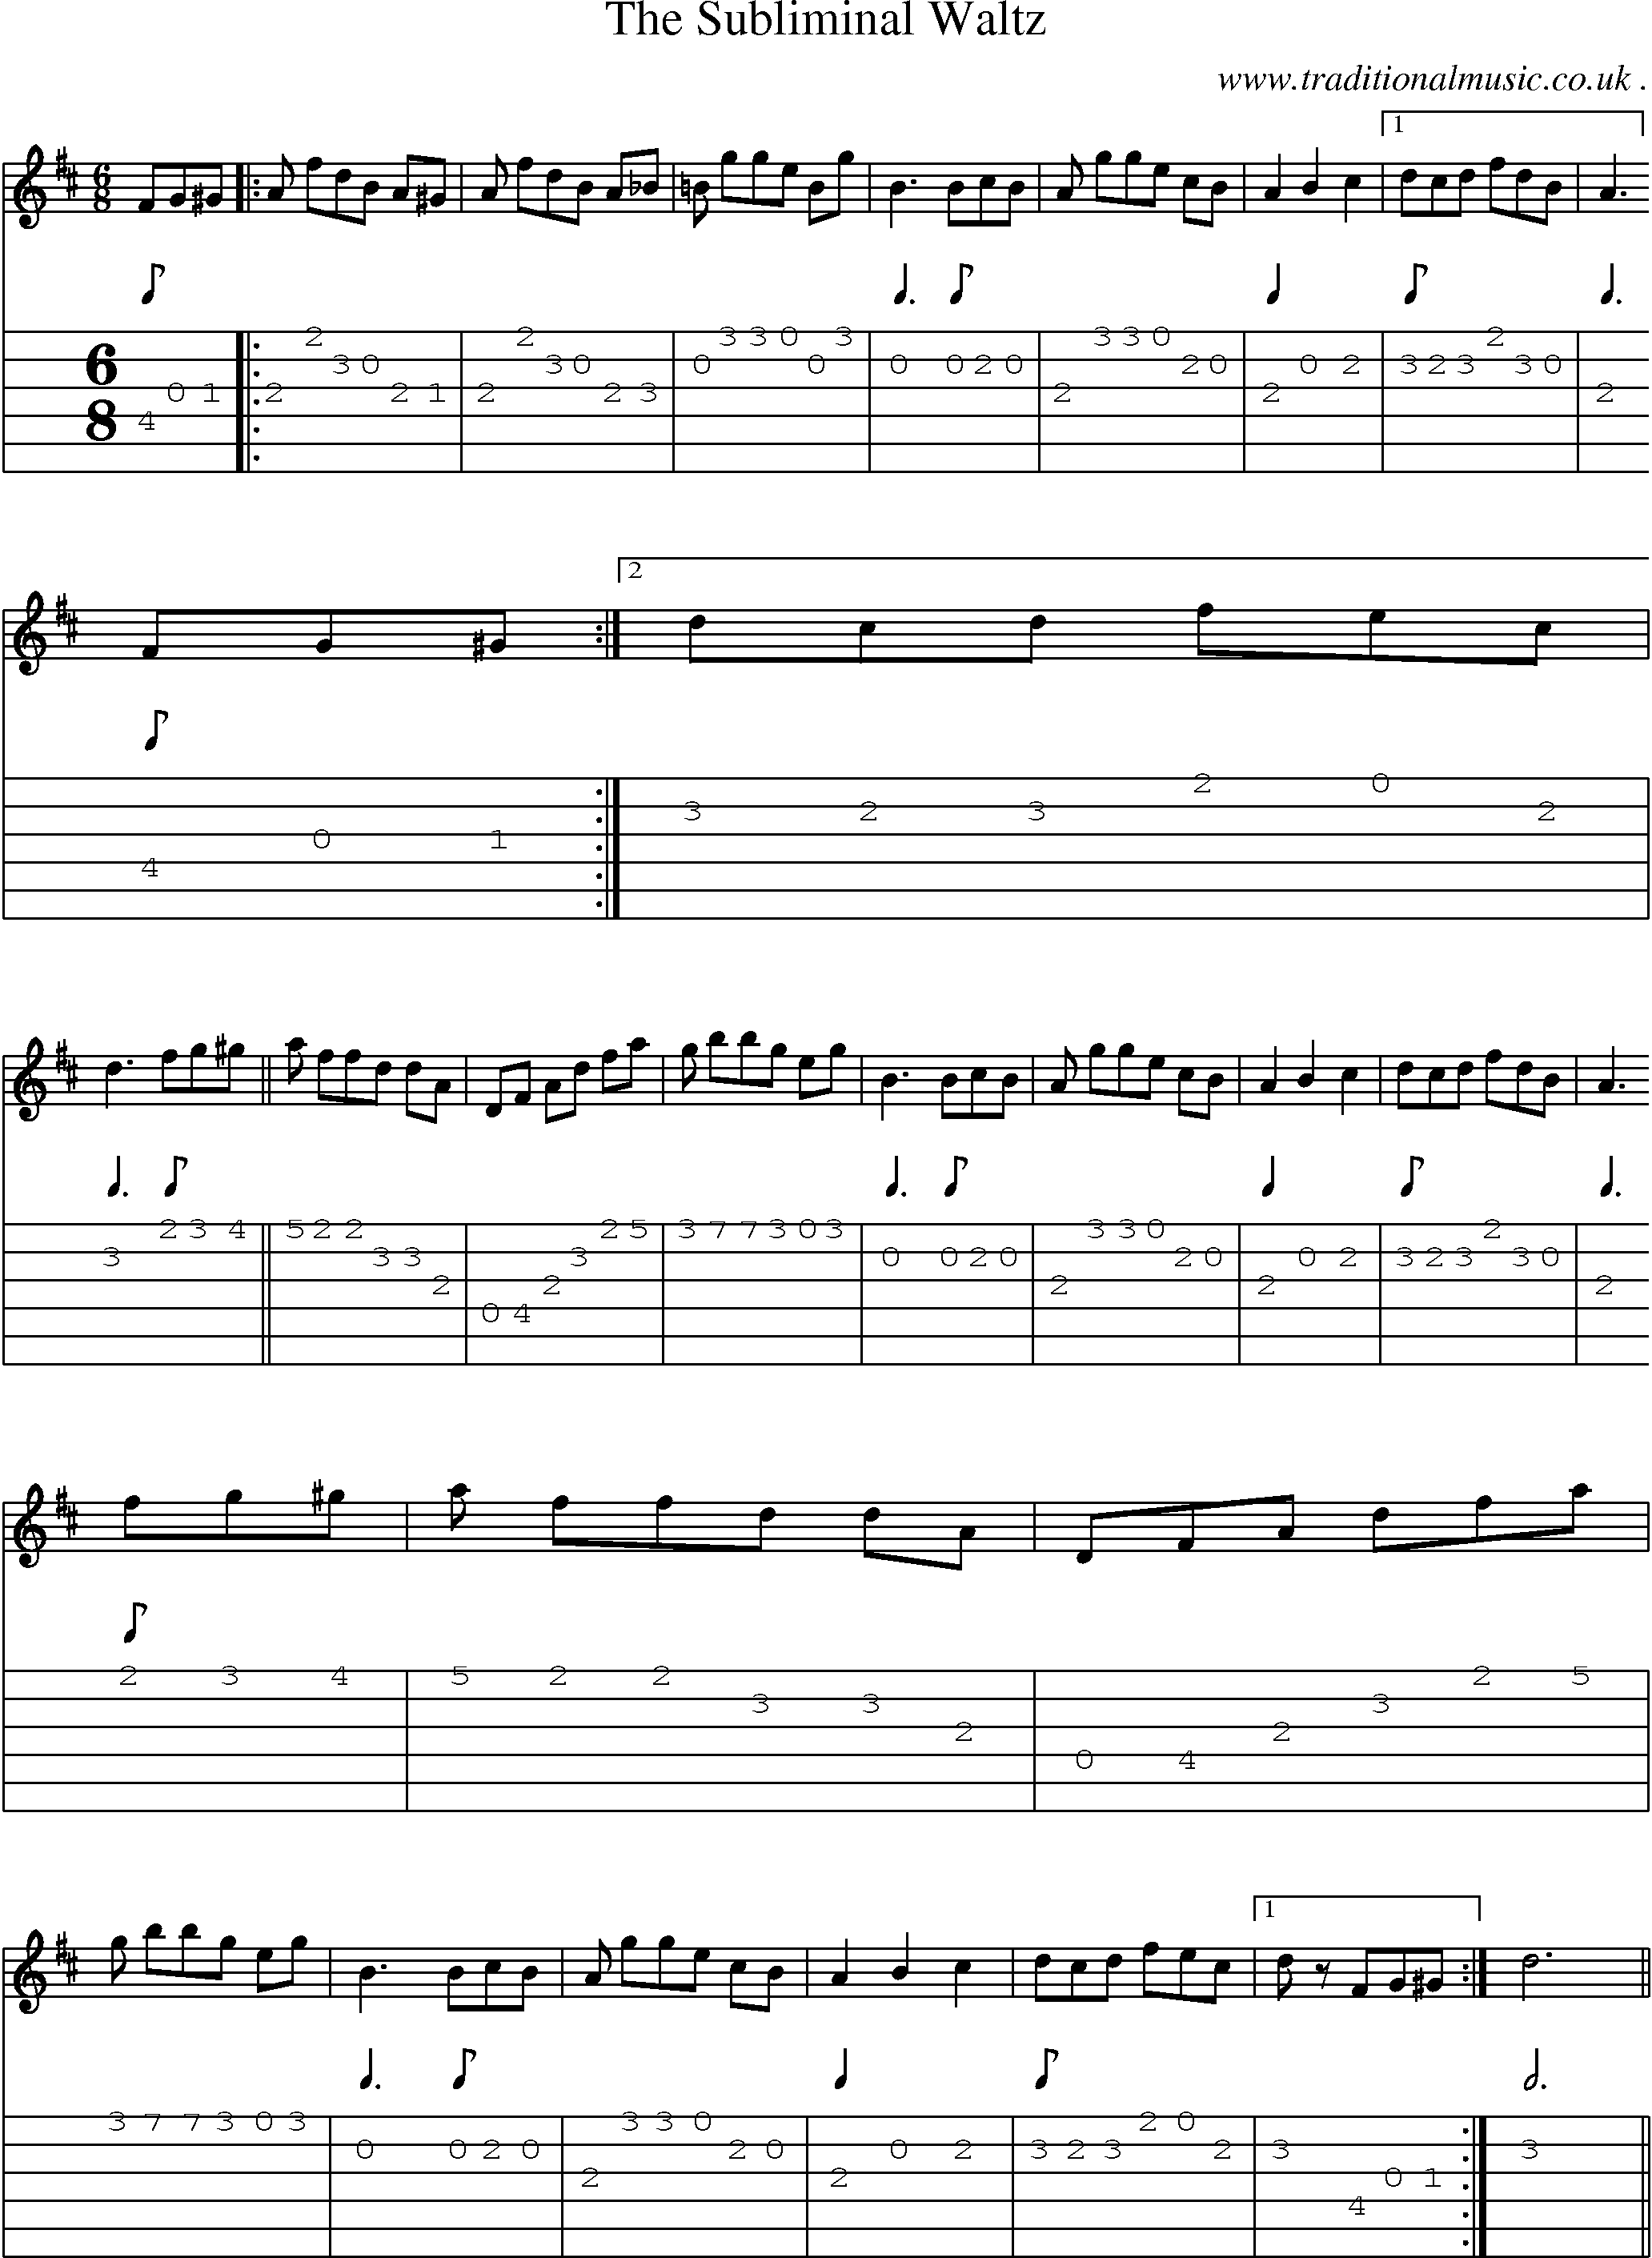 Sheet-Music and Guitar Tabs for The Subliminal Waltz